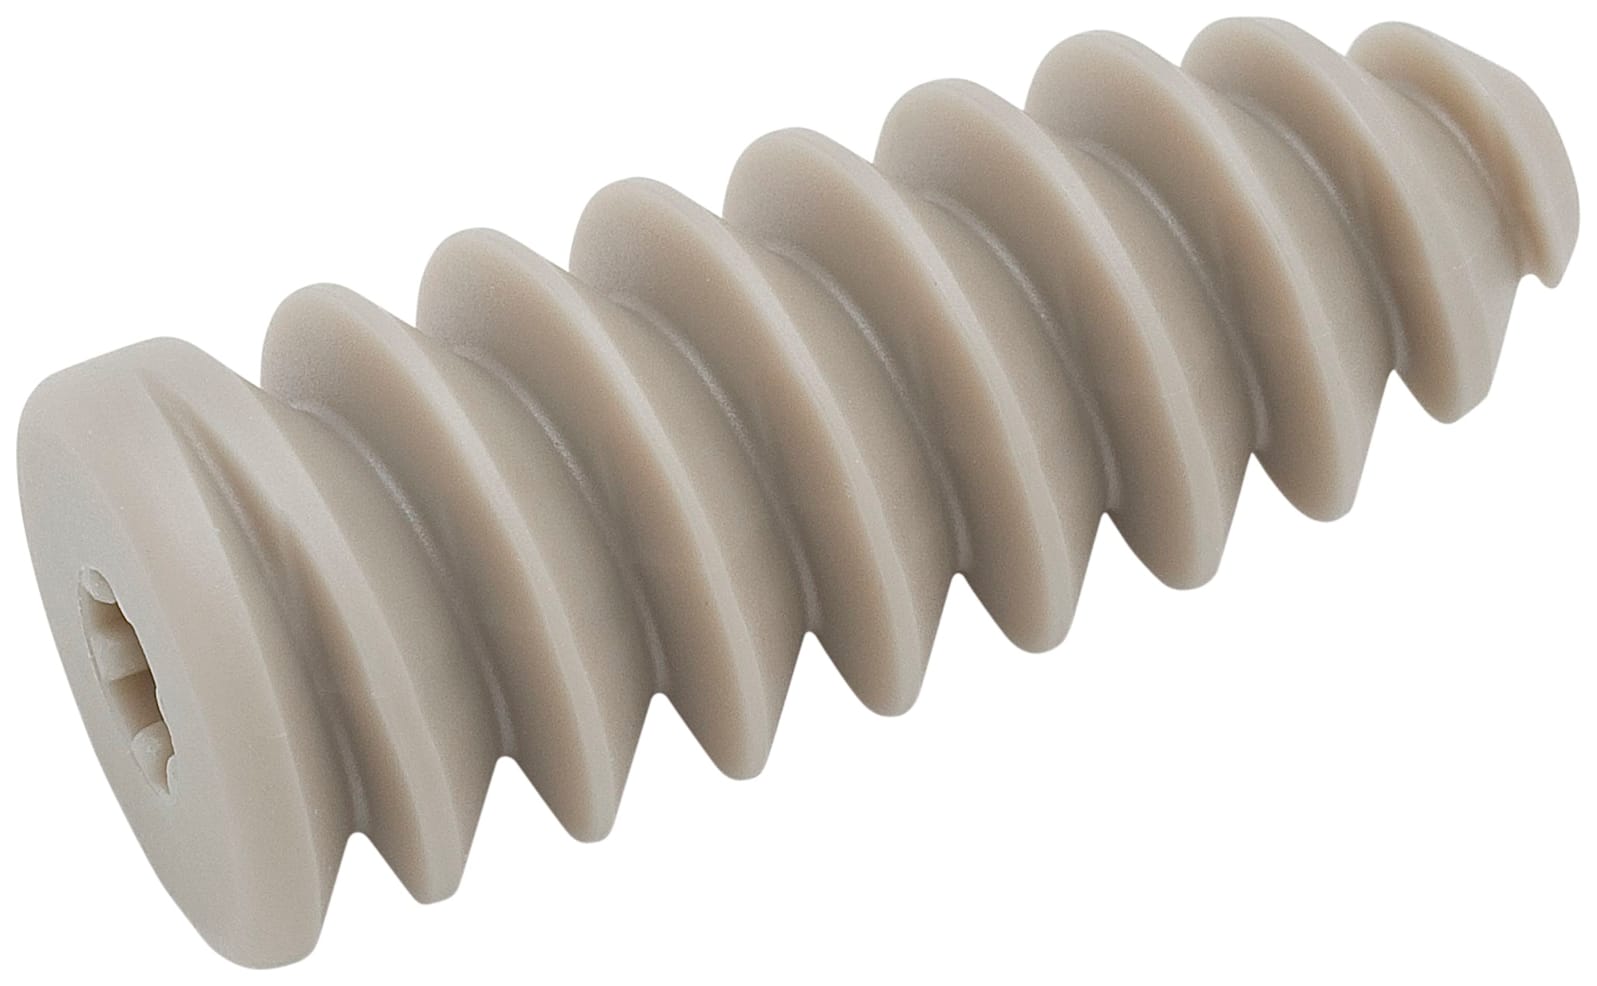 Screw, Round Delta Tapered Interference, with Disposable Sheath, 11mm x 28 mm